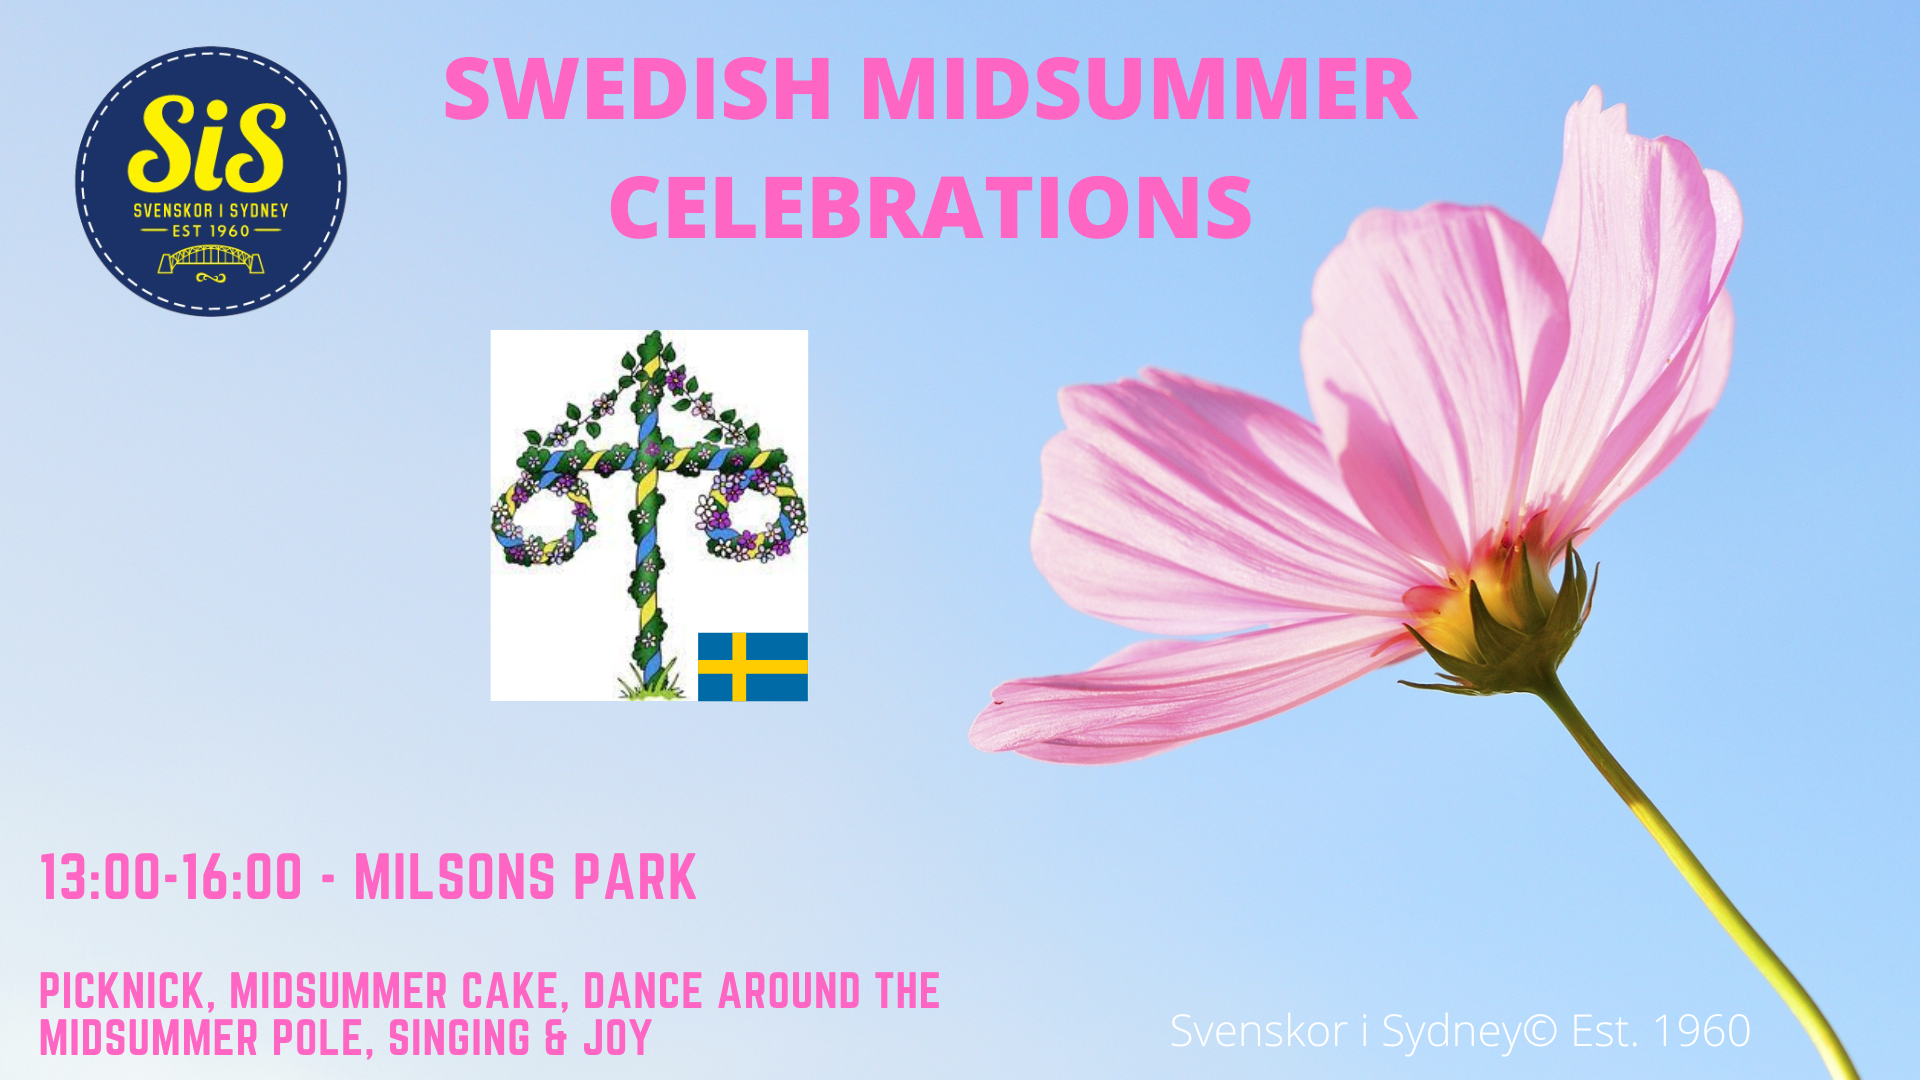 In the left corner you can see Svenskor in Sydney's logo, in the middle you can see a Swedish midsummer pole and on the right you can see a pink flower. The text reads Swedish Midsummer and indicates the time for the Swedish Midsummer celebration (Sunday 25 June, 13:00 – 16:00)